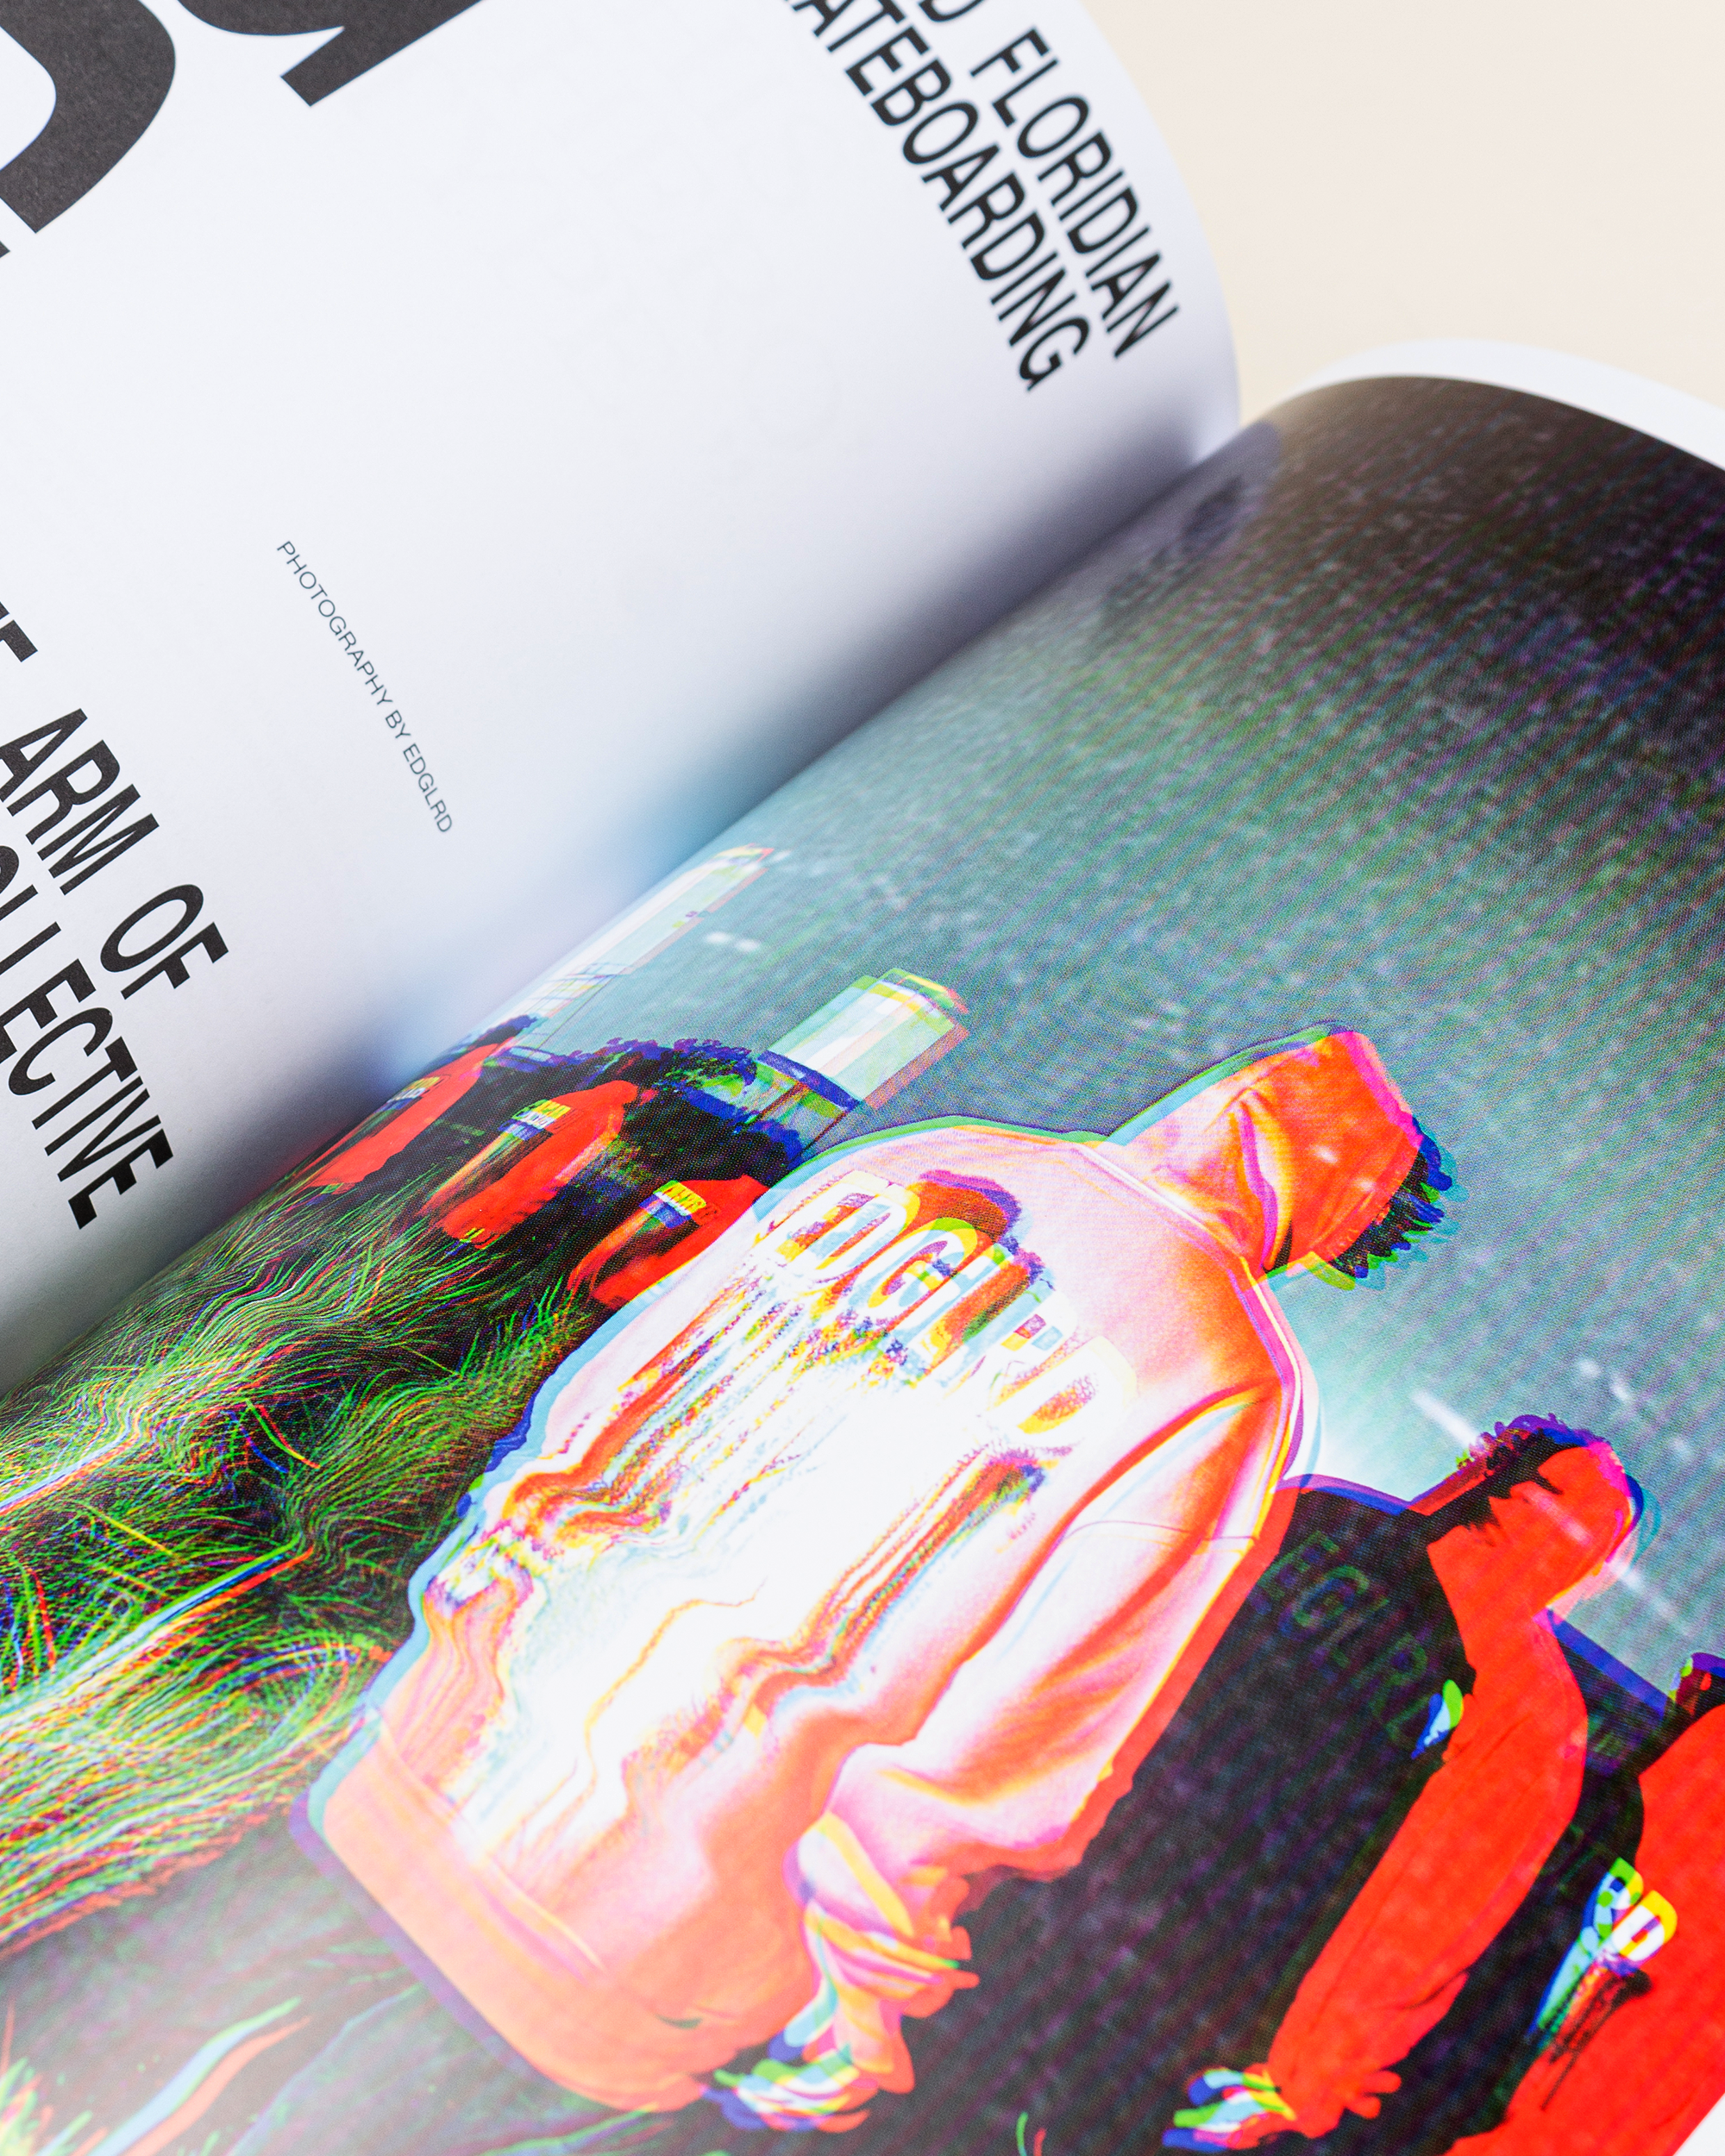 HYPEBEAST Magazine numero 33: The Systems Issue